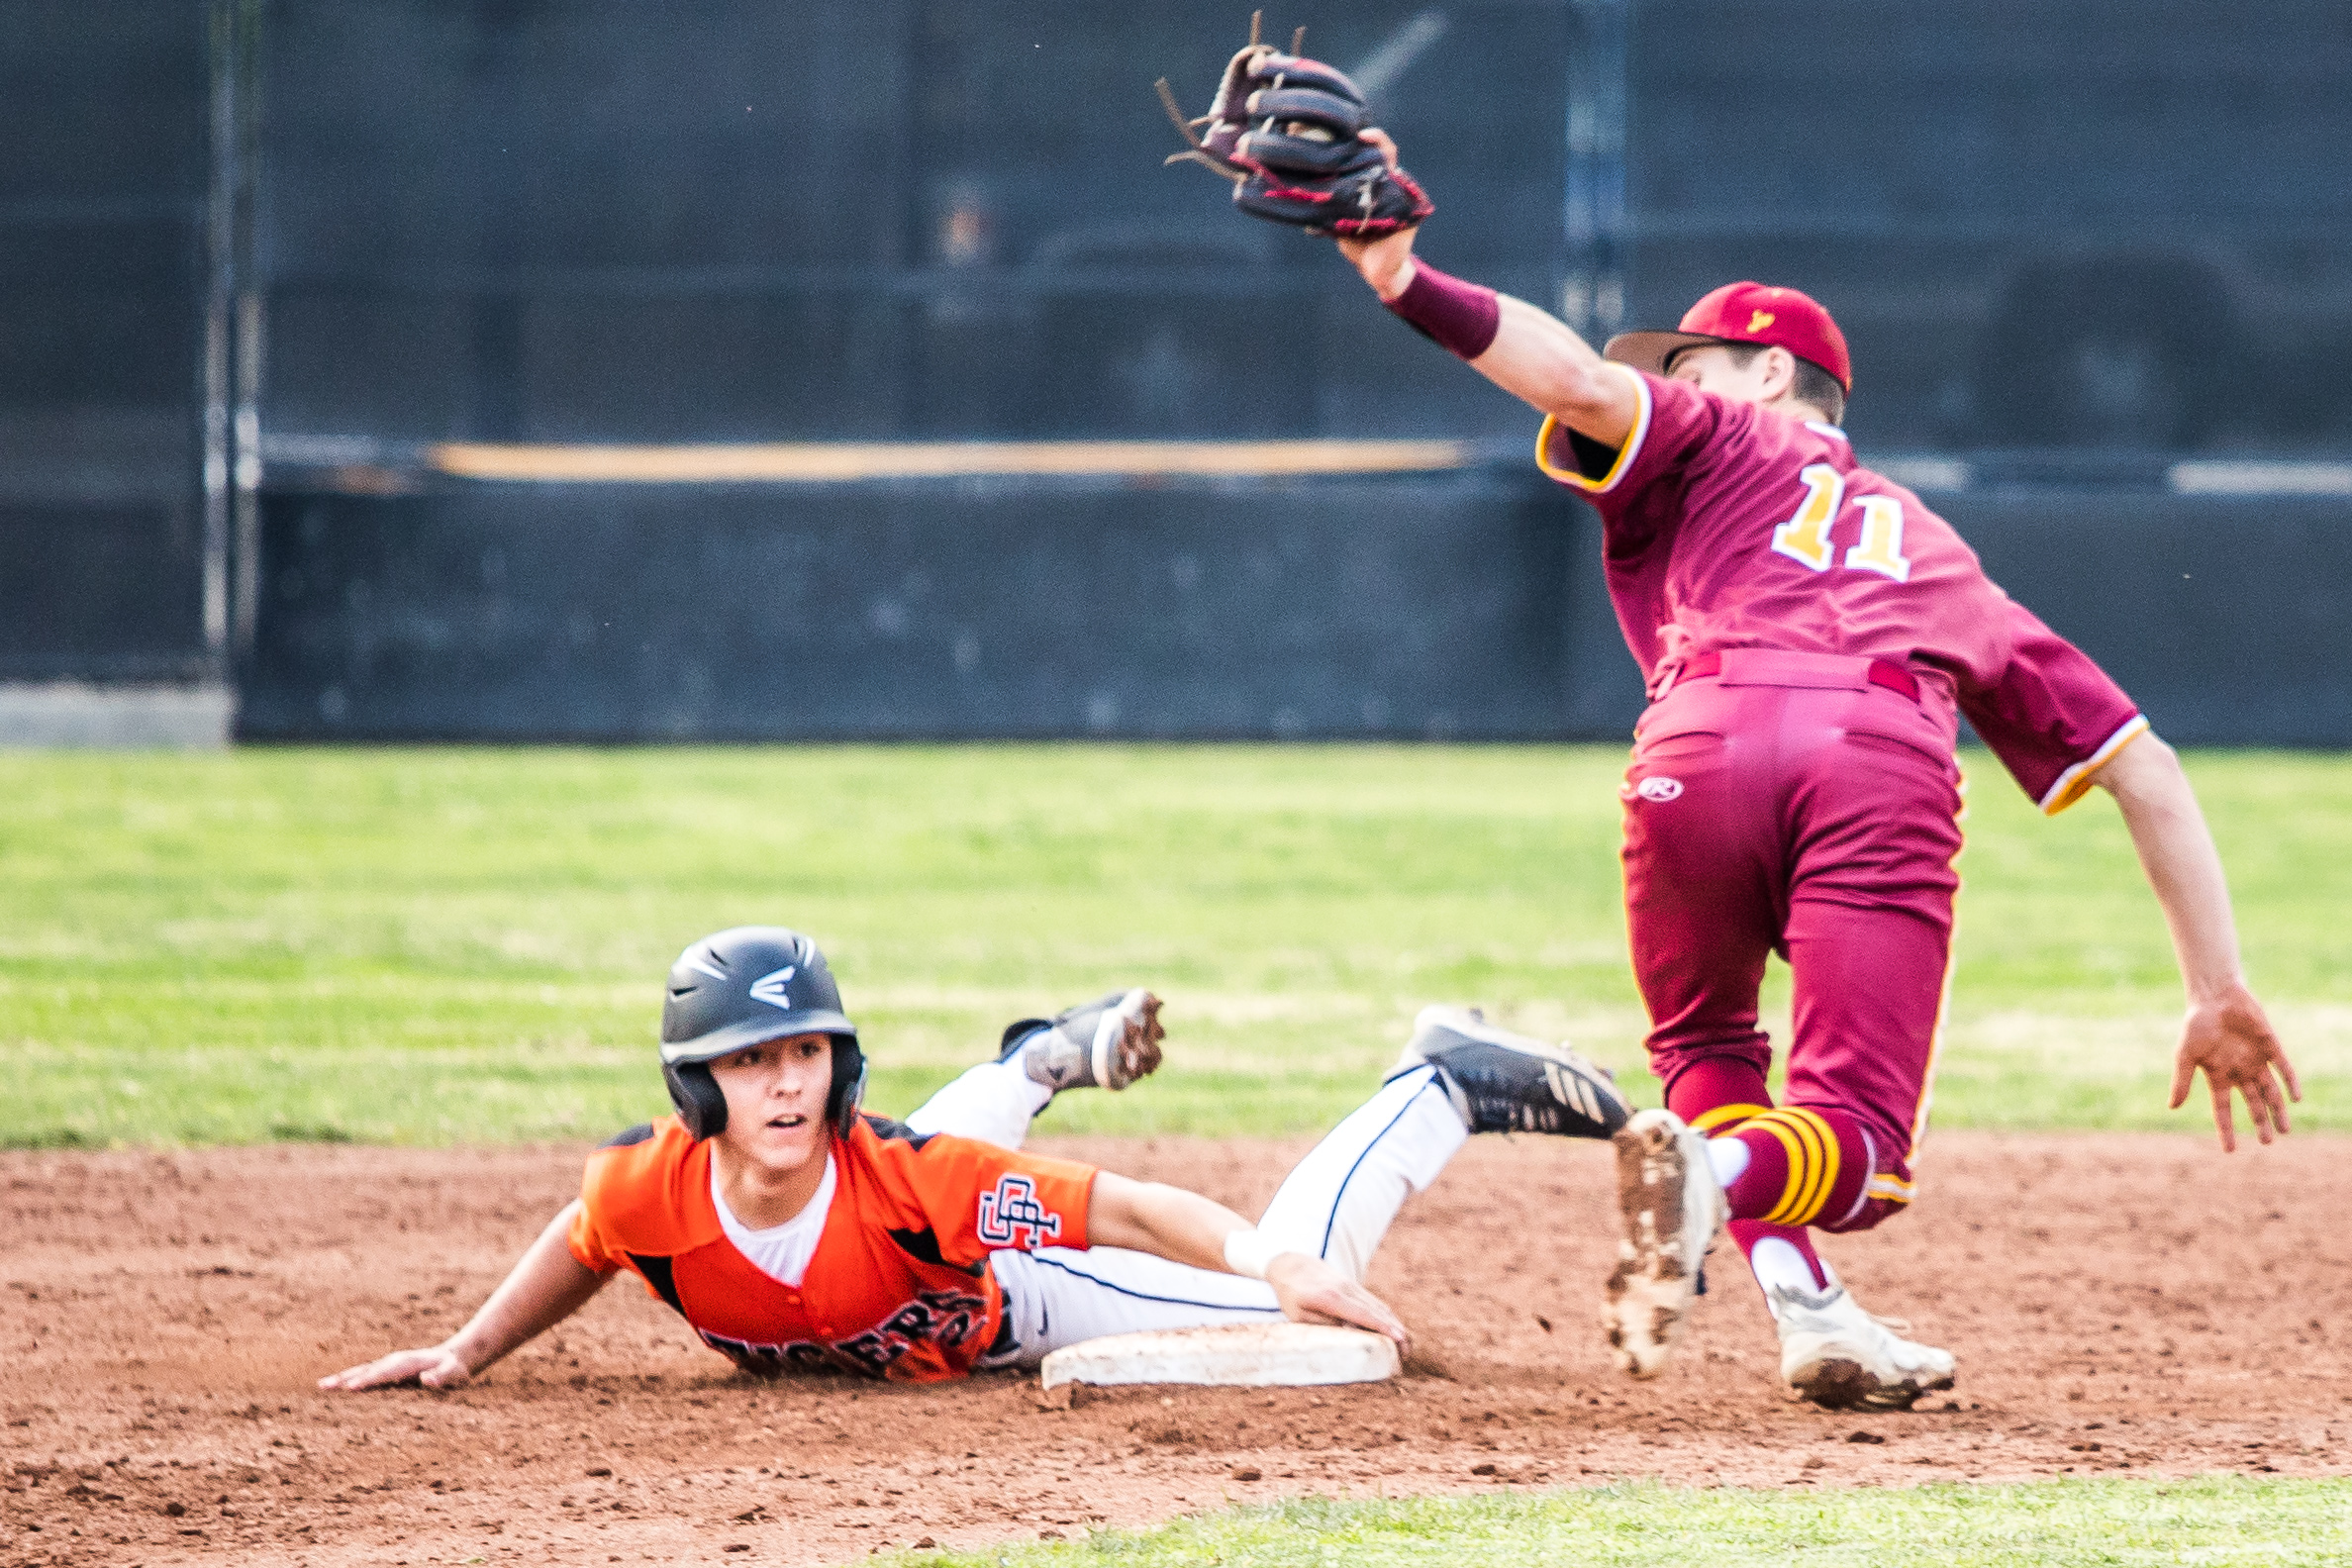 Thumbnail for Offensive struggles sink Tigers in loss to La Cañada